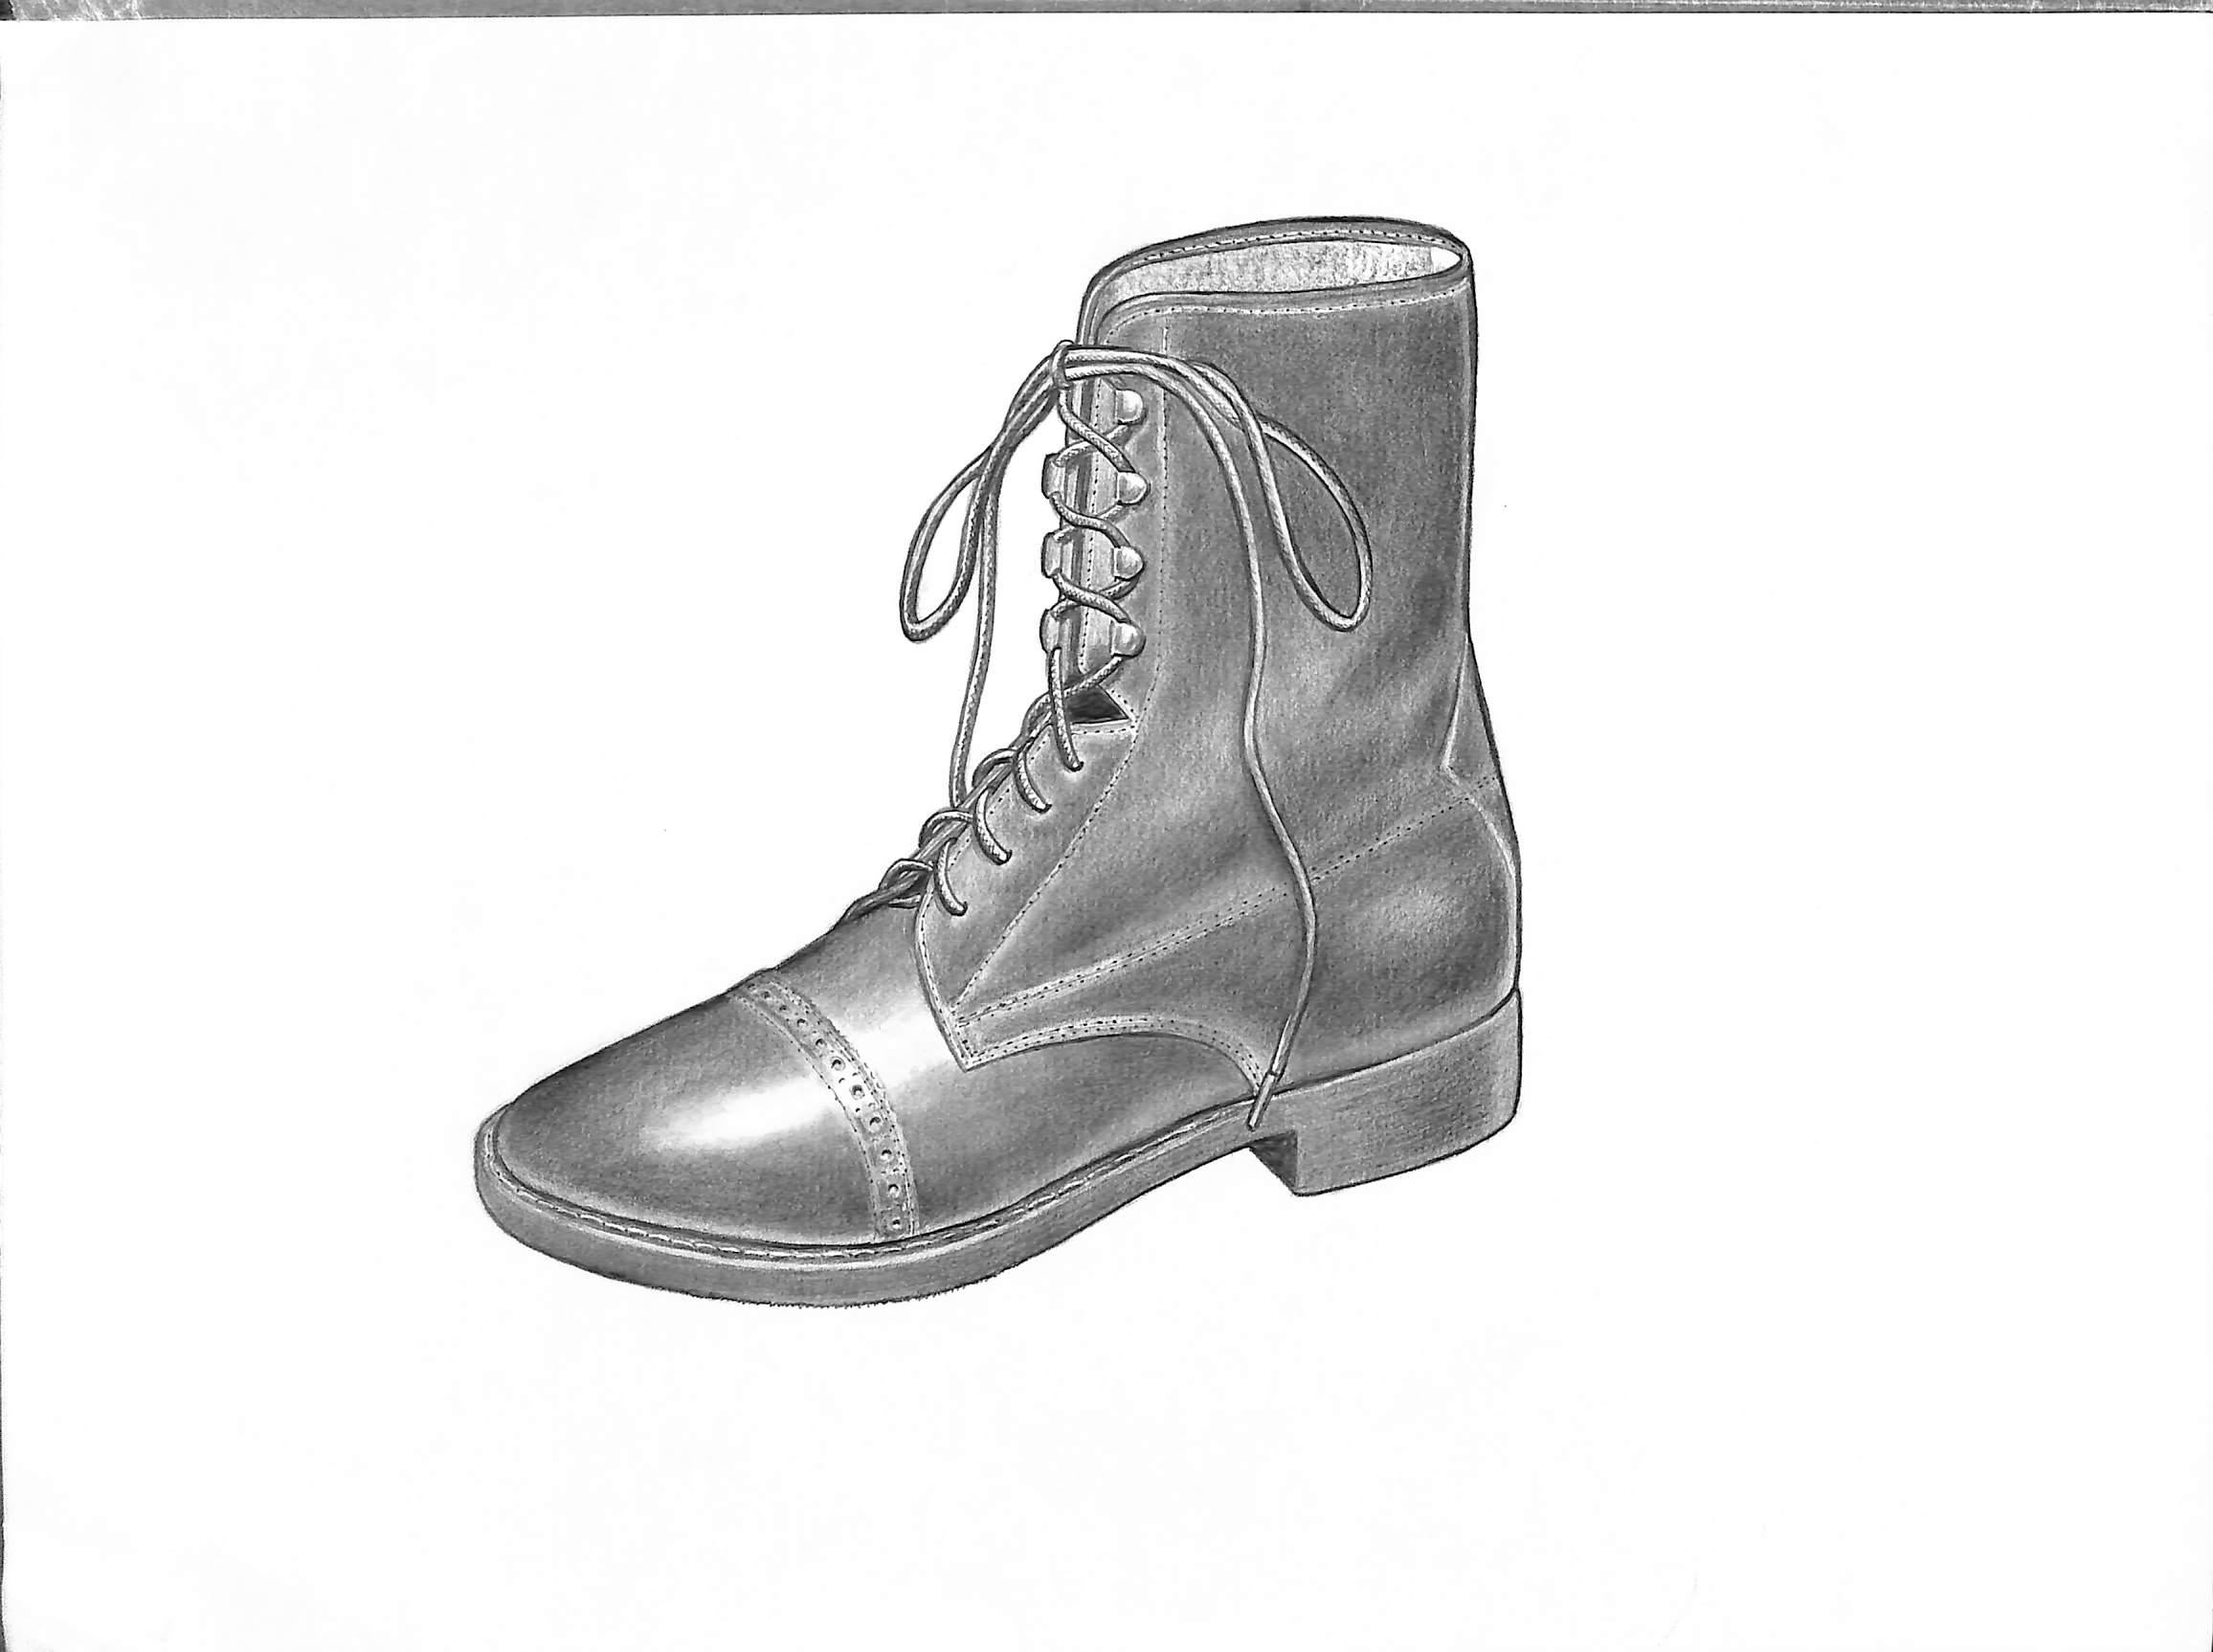 Children's Leather Paddock Boot by Eastern Shoe Graphite Drawing - Art by Unknown